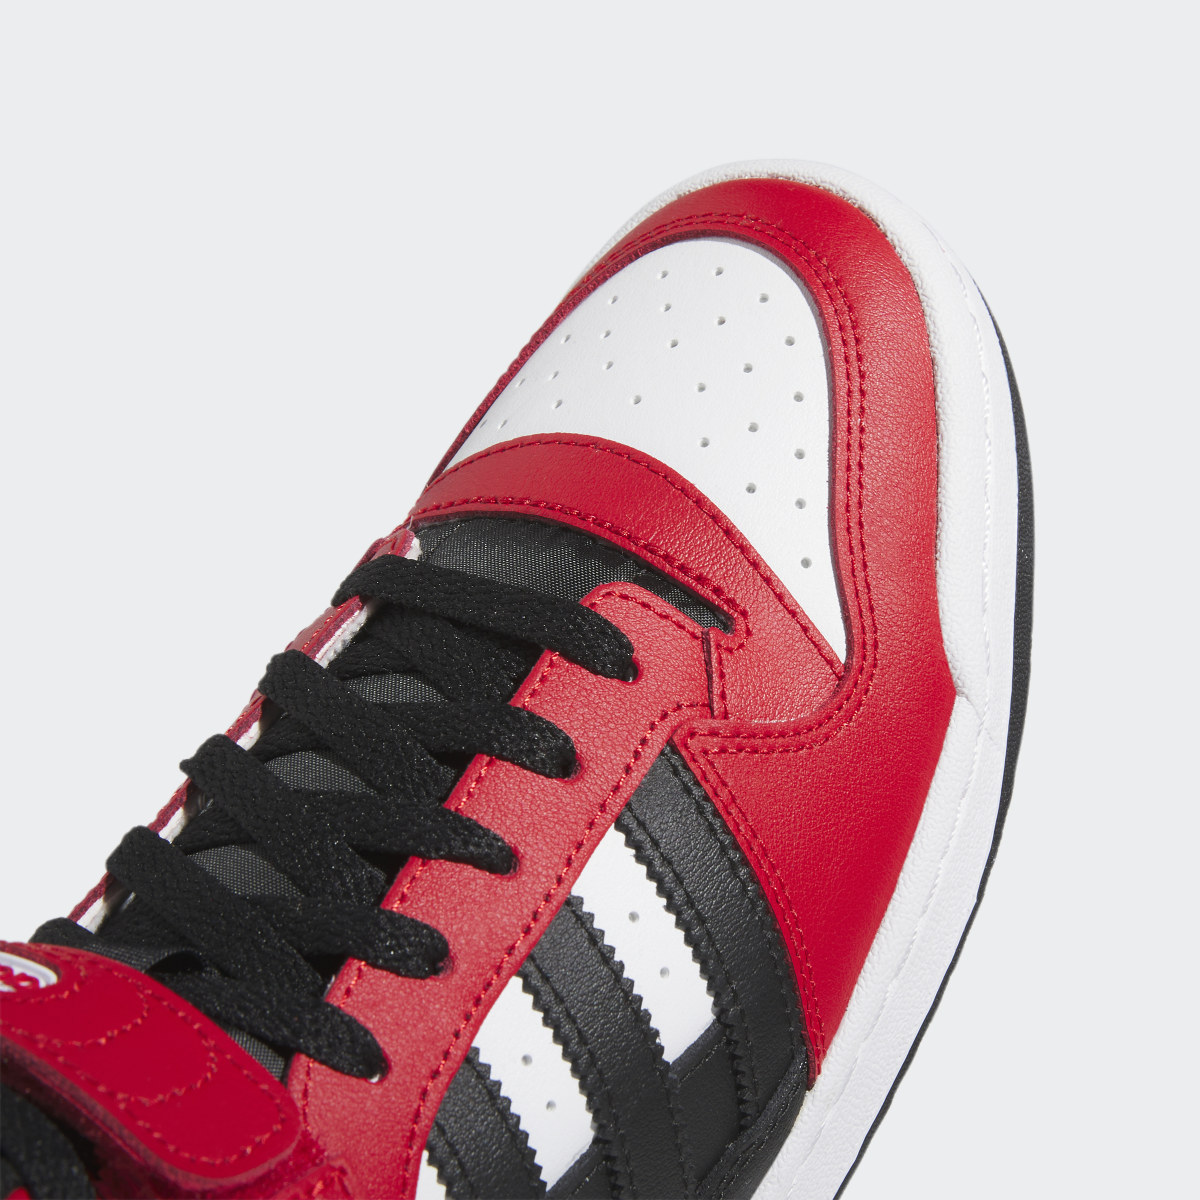 Adidas Forum Mid Shoes. 9